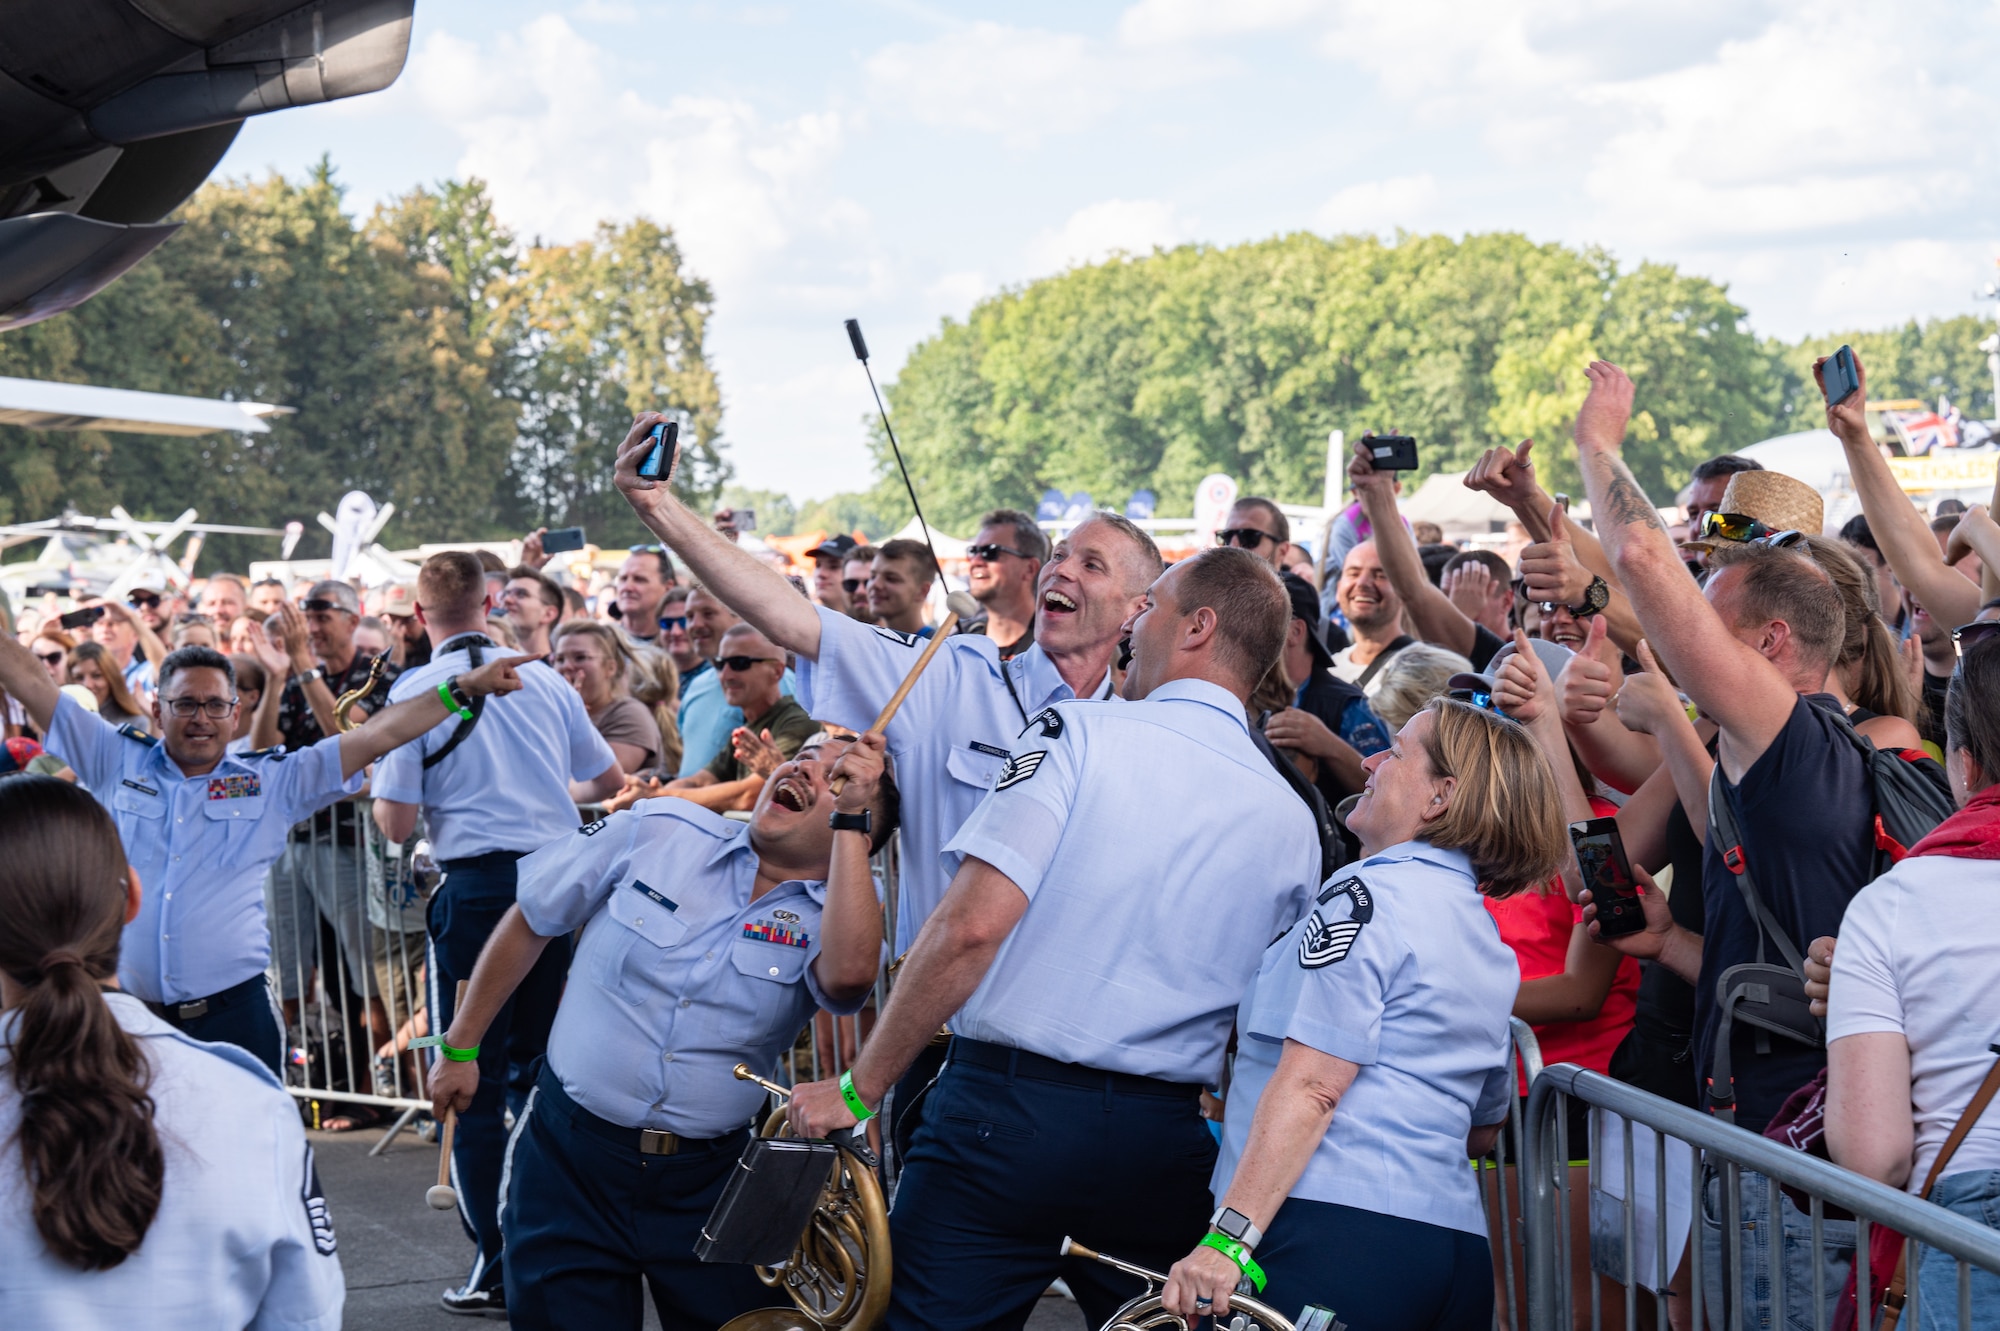 U.S. Air Force Airmen assigned to the U.S. Air Forces in Europe Ceremonial Band, pose for a photo with a spectator’s phone during NATO Days event at Leoš Janáček Airport in Ostrava, Czech Republic, Sept. 17, 2023.